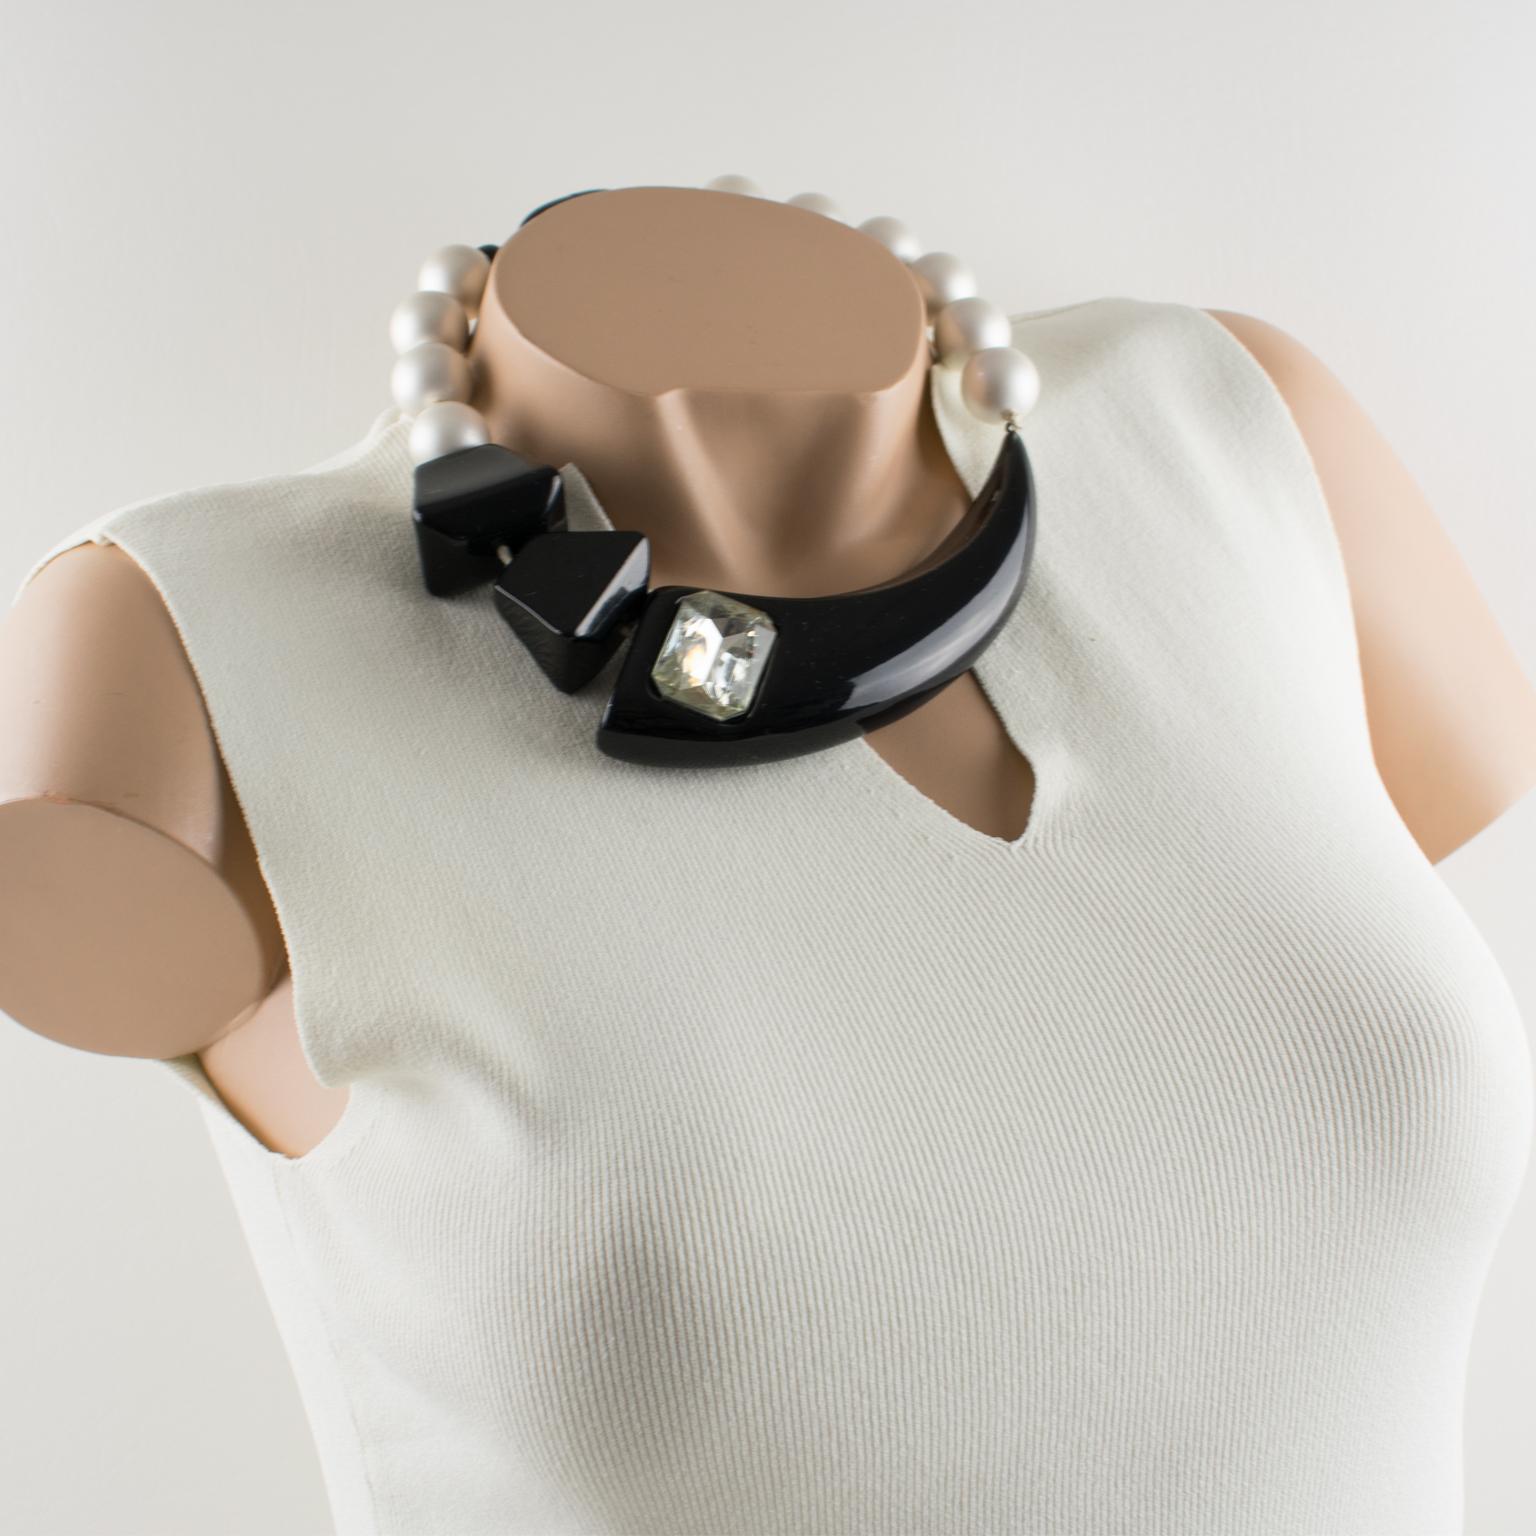 Stunning Angela Caputi, made in Italy resin choker beaded necklace. Working on black and white contrast, this necklace features asymmetric geometric elements. Pearlized white resin round beads ornate with a huge faceted true licorice black resin